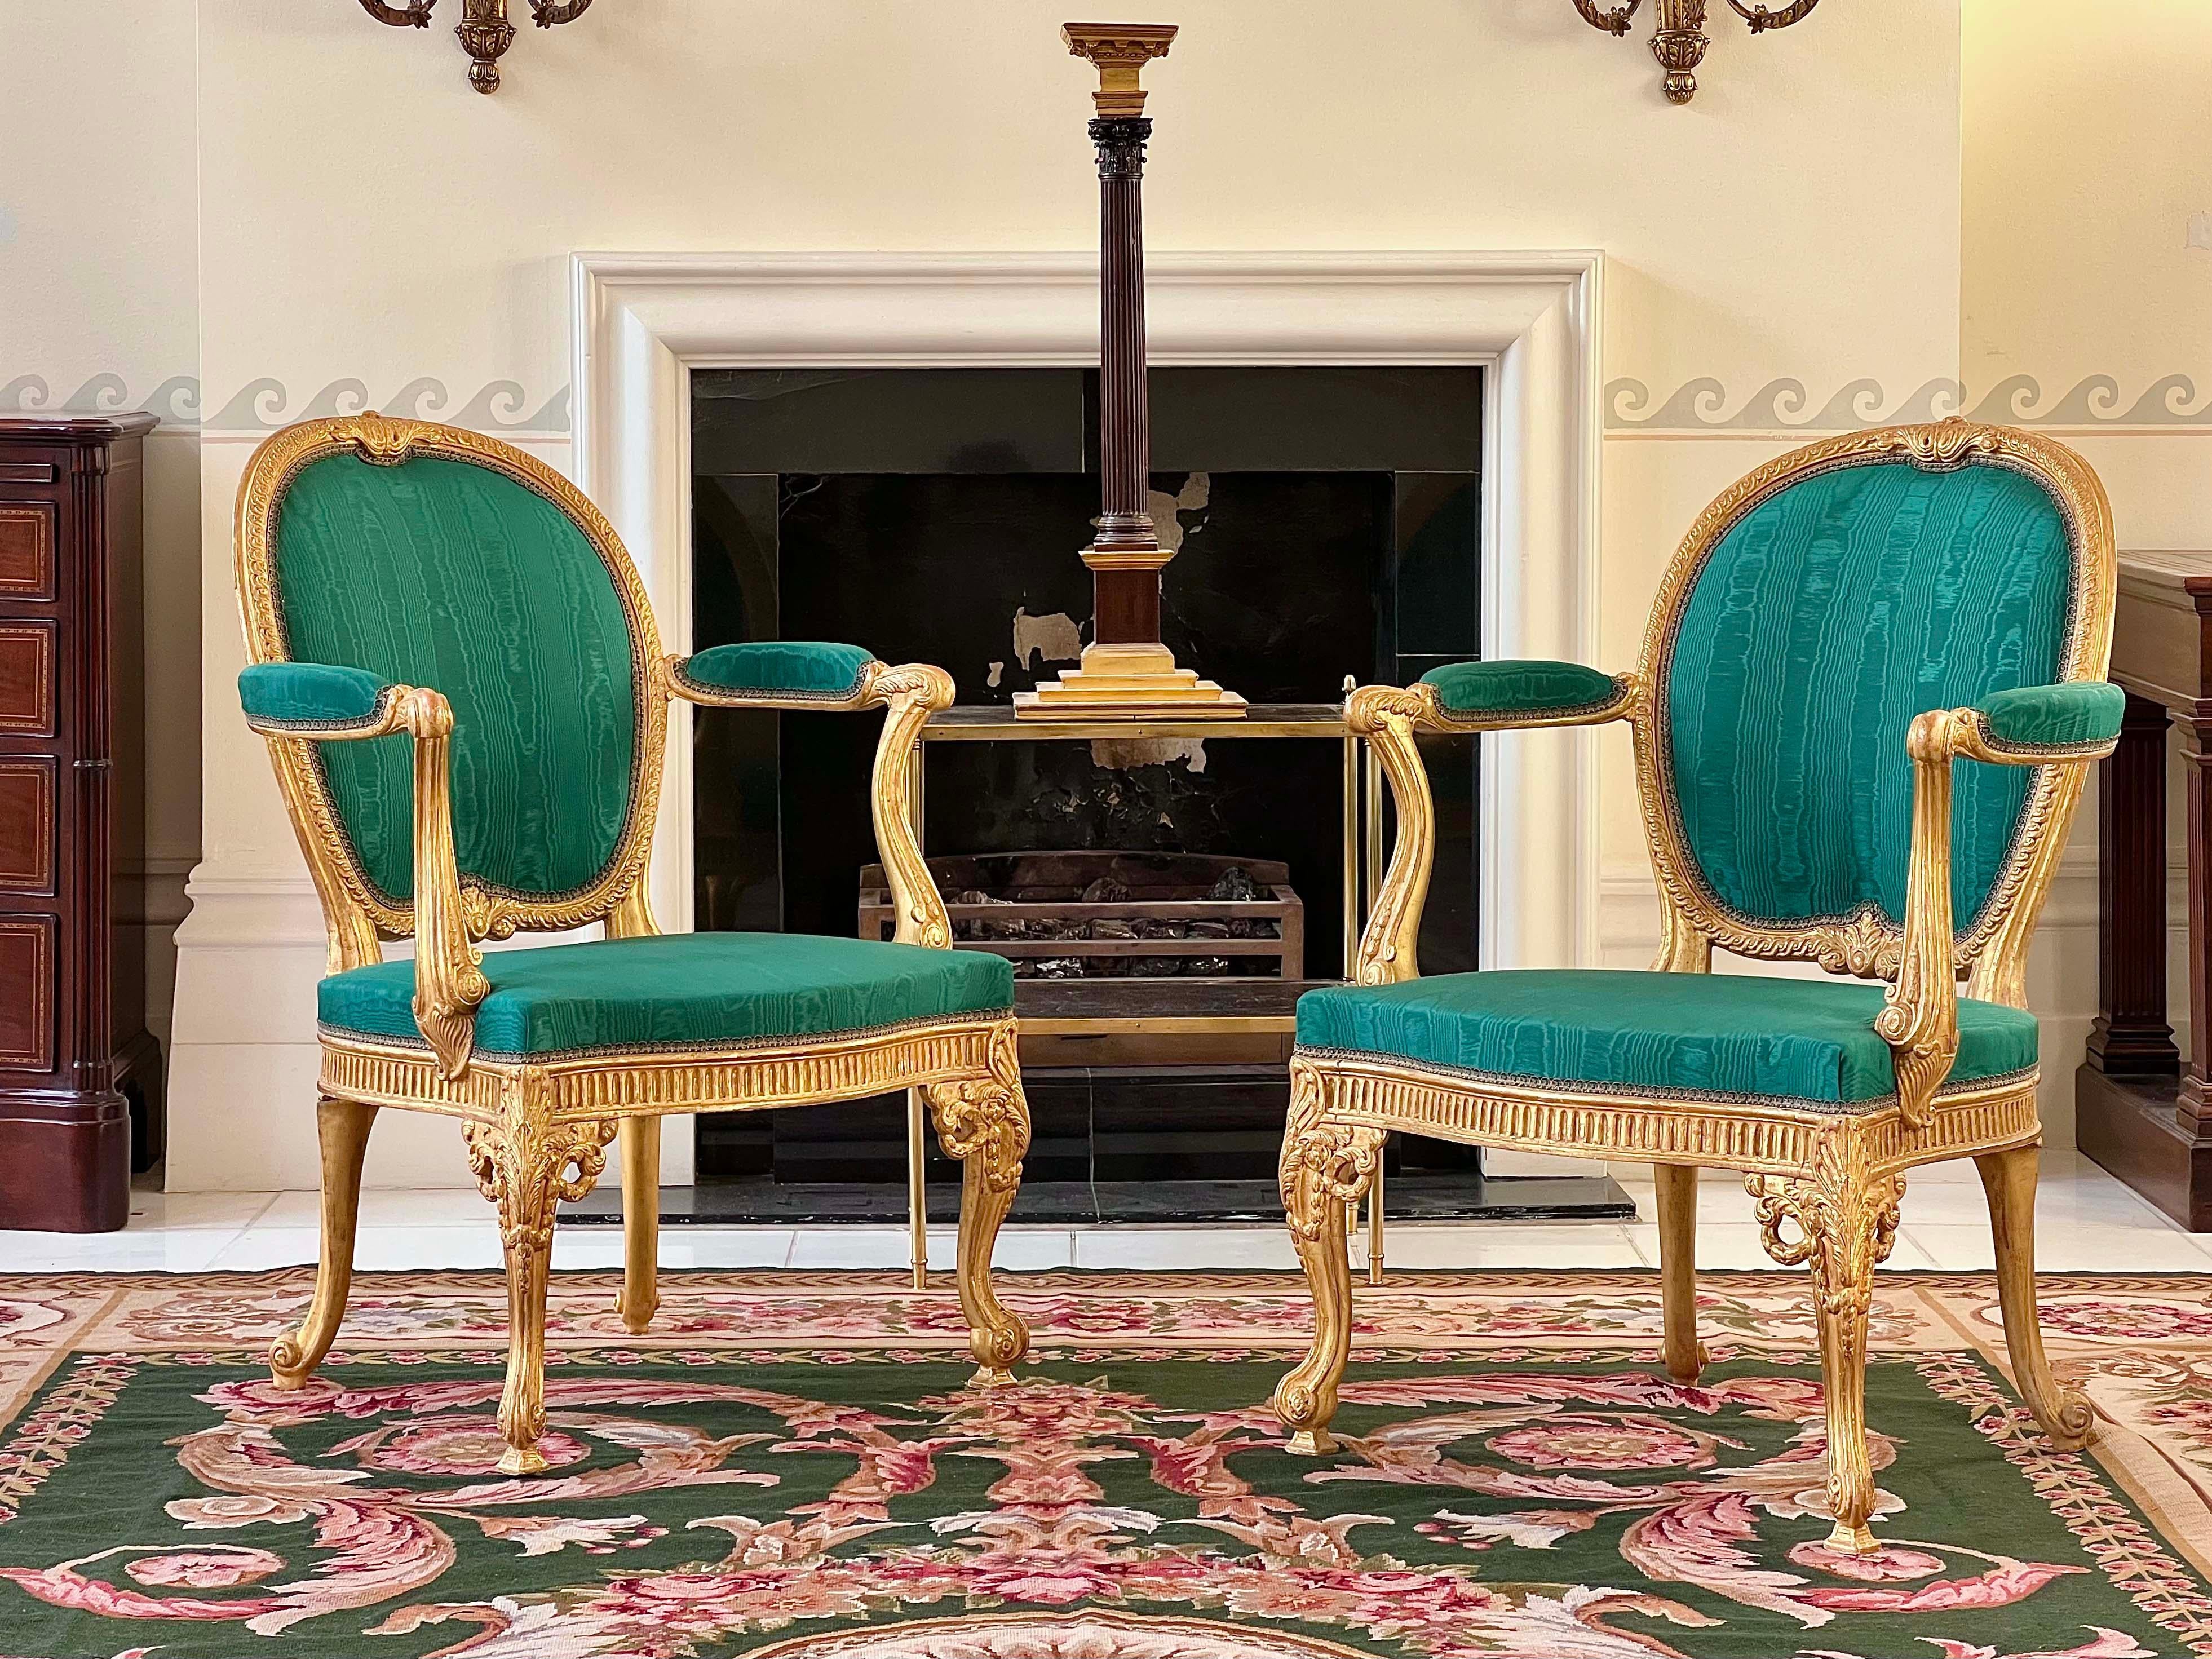 An exceptional George III style giltwood armchair, after one of Thomas Chippendale's most beautiful models. Two armchairs available - select quantity 2 to purchase both armchairs.

English, c. 1900-1920.

Design
The present armchair belong to a